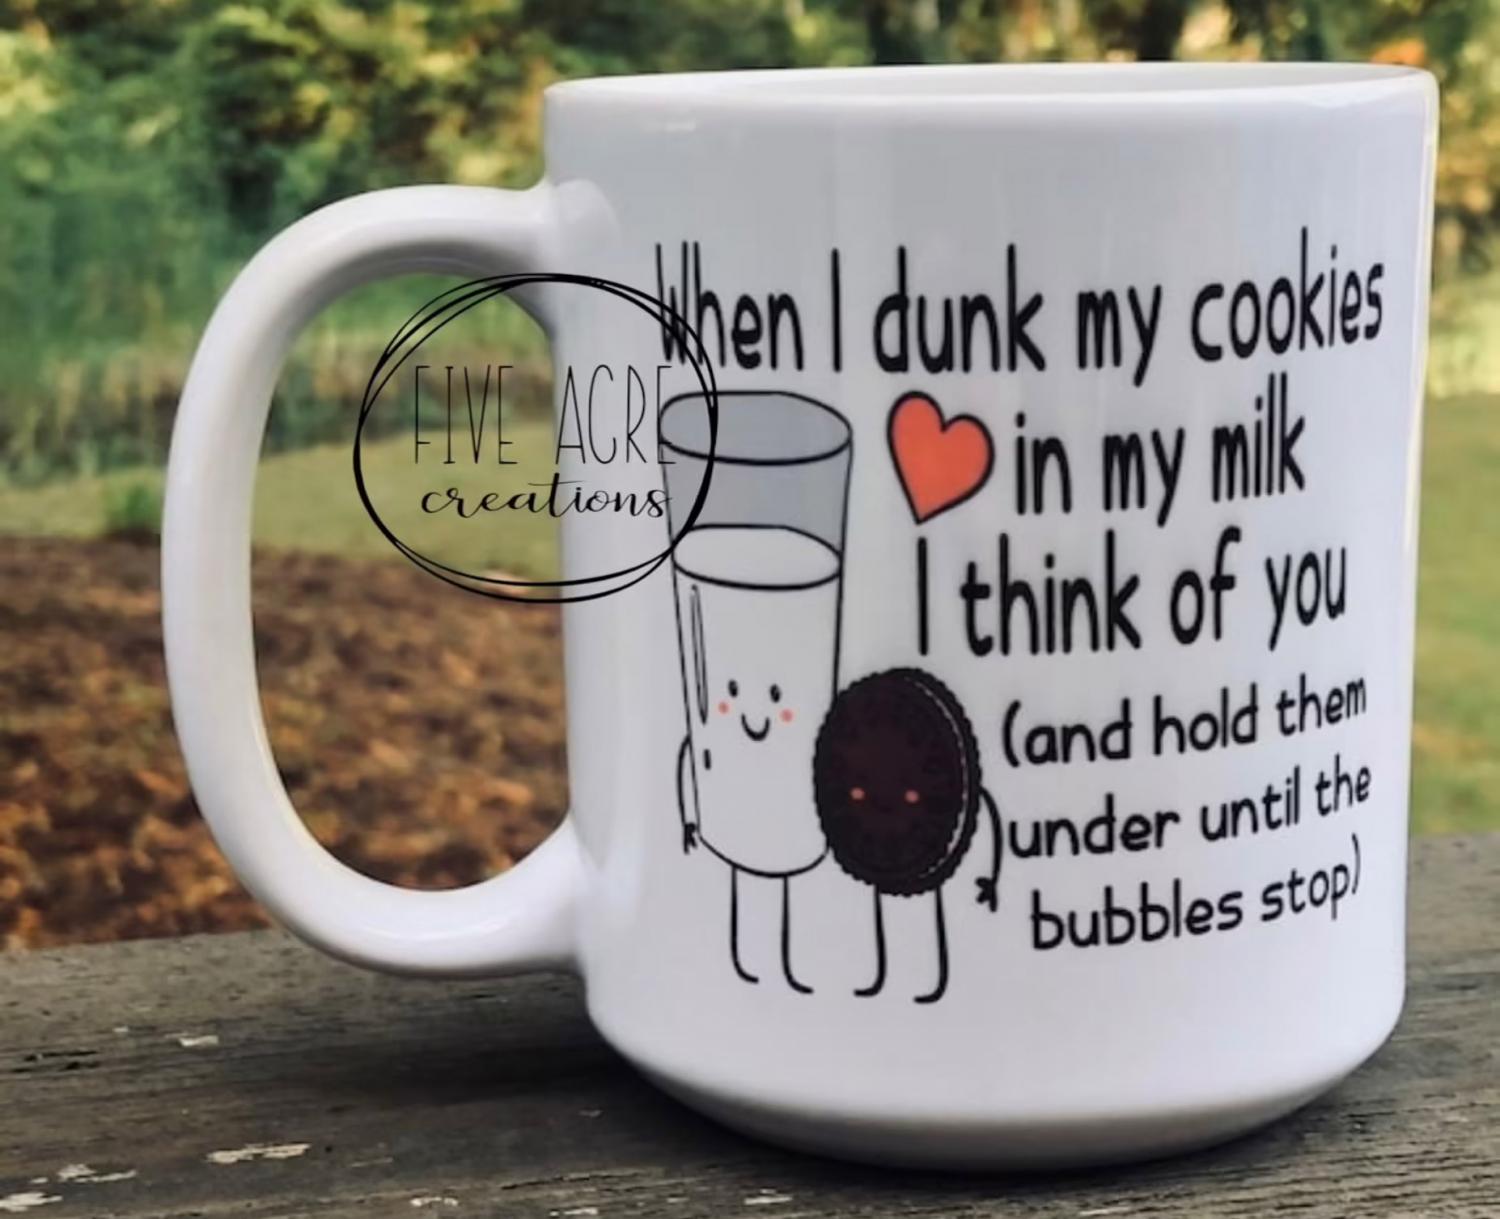 When I Dunk Cookies In Milk I Think Of You and Hold Them Under Until The Bubbles Stop